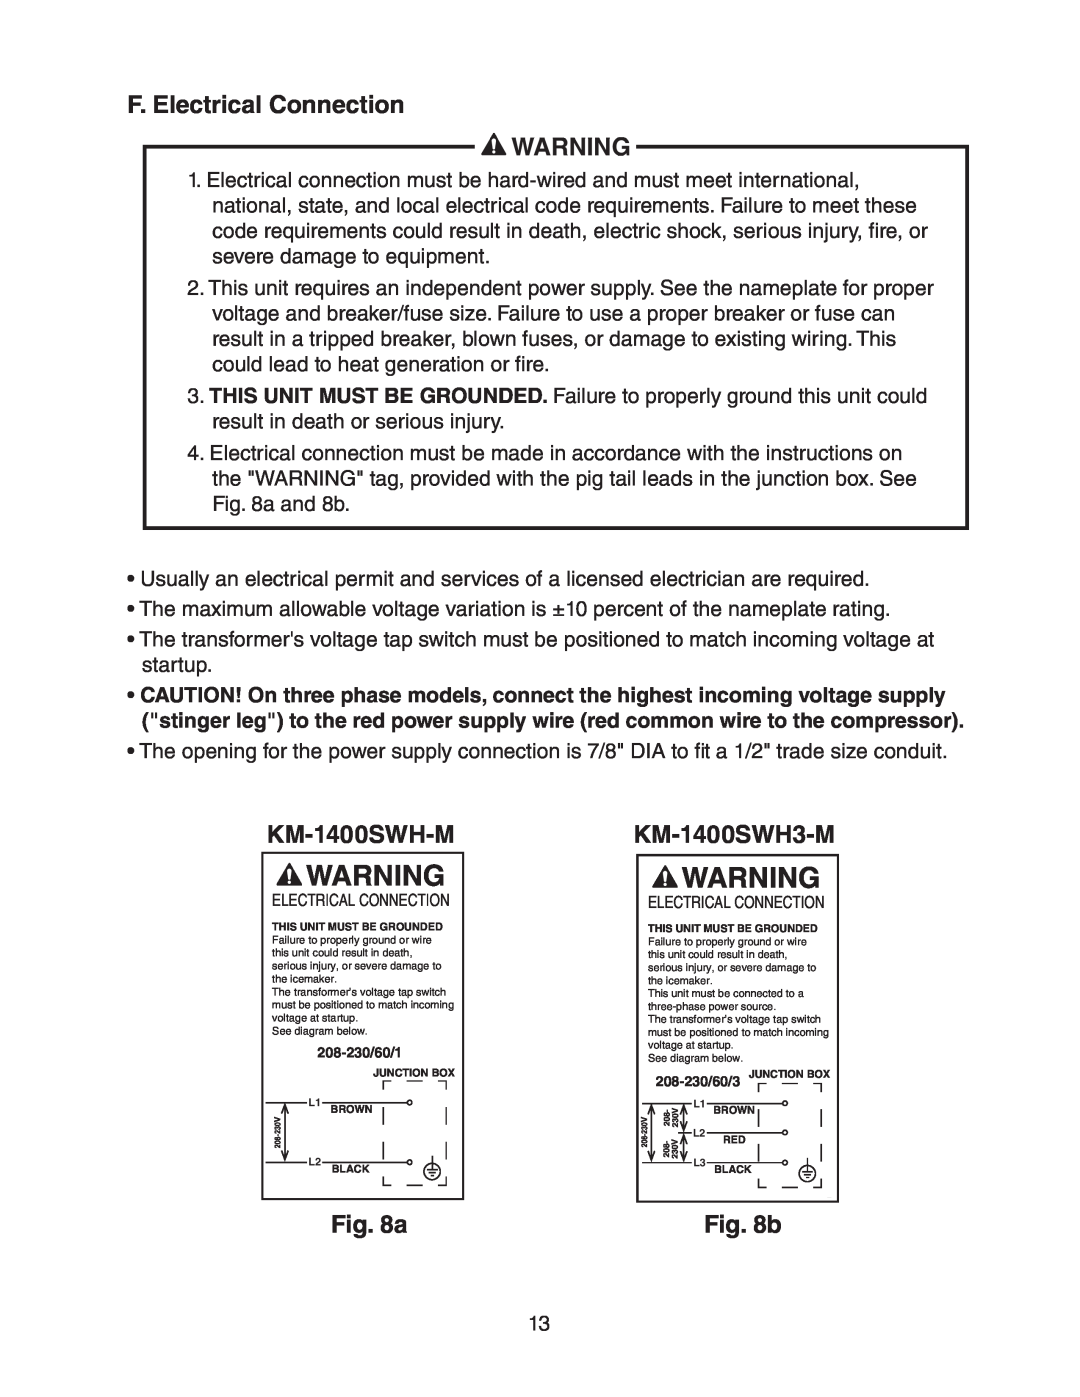 Hoshizaki KM-1400SWH/3-M instruction manual F. Electrical Connection, KM-1400SWH-M, KM-1400SWH3-M, b 